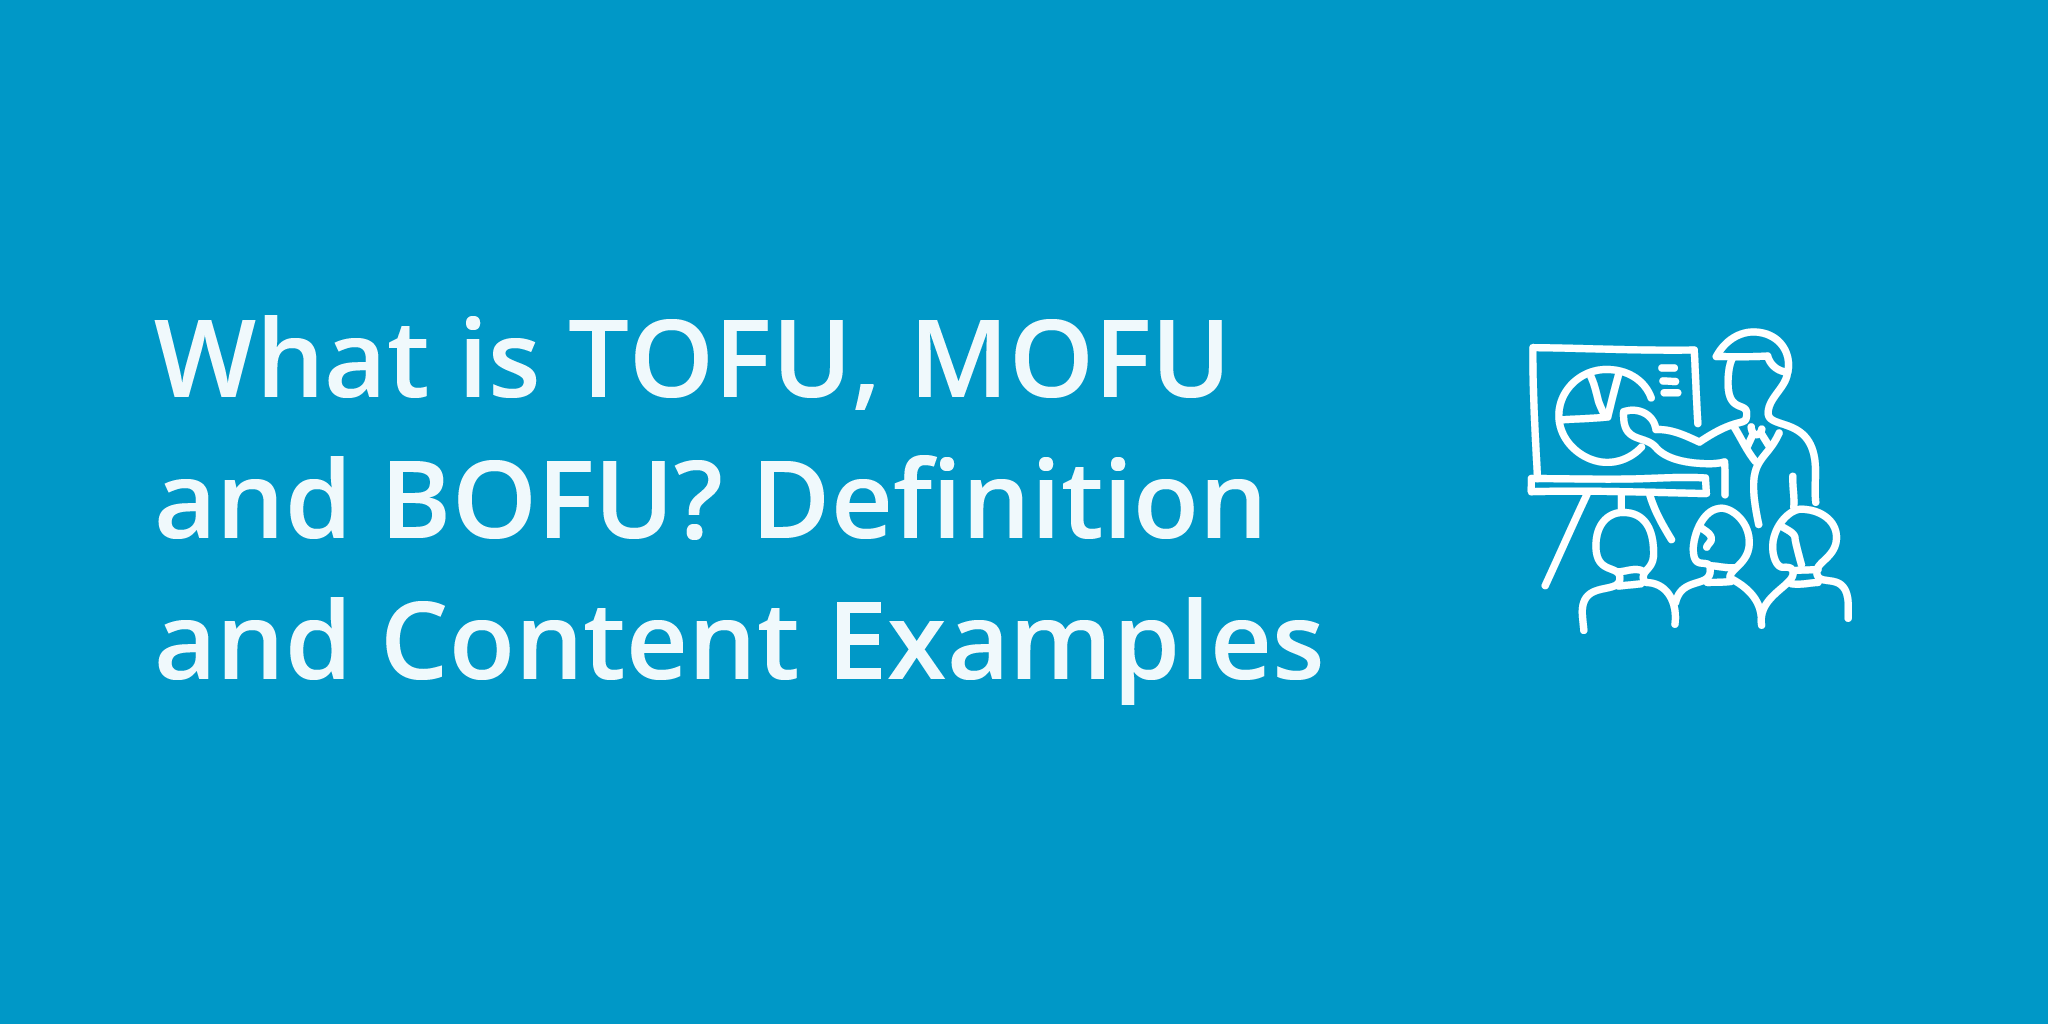 What is TOFU, MOFU and BOFU? Definition and Content Examples